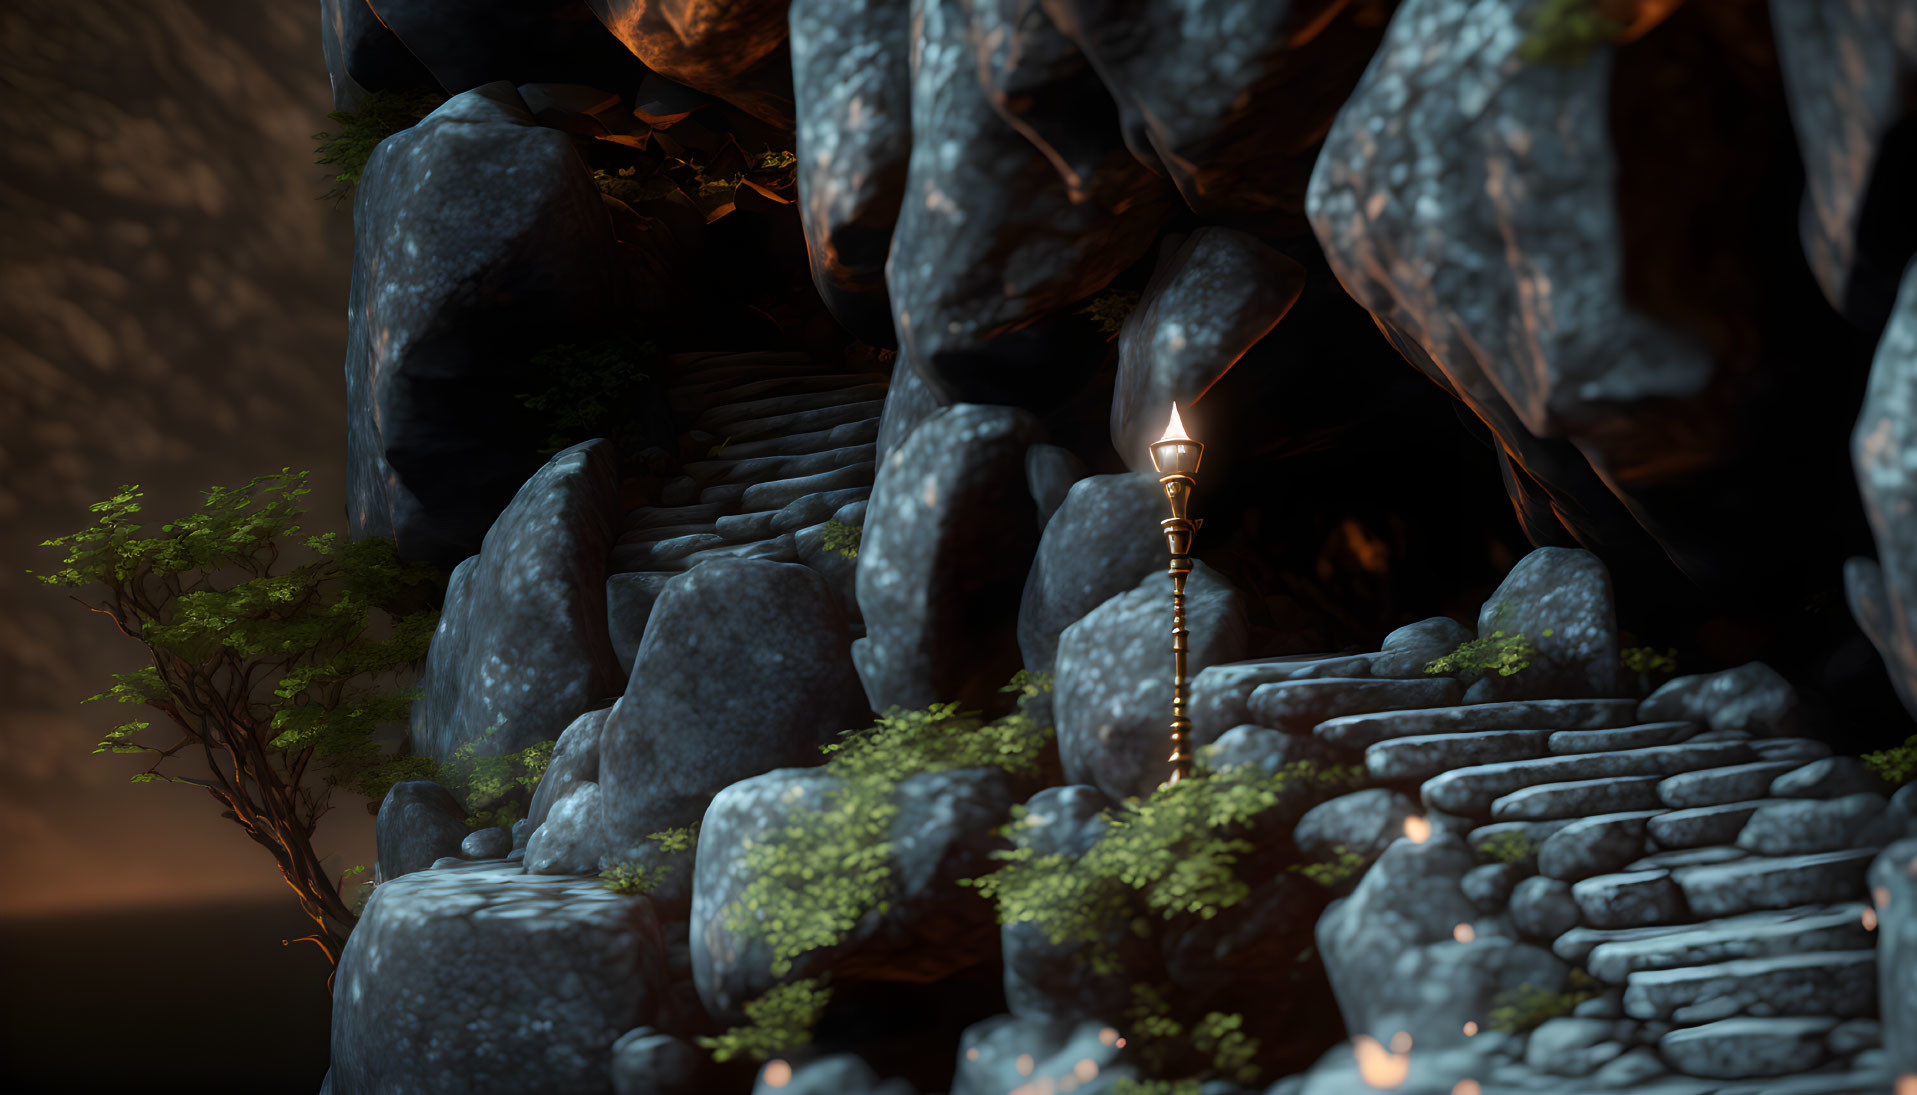 Mystical stone staircase in rugged cave with candlelight